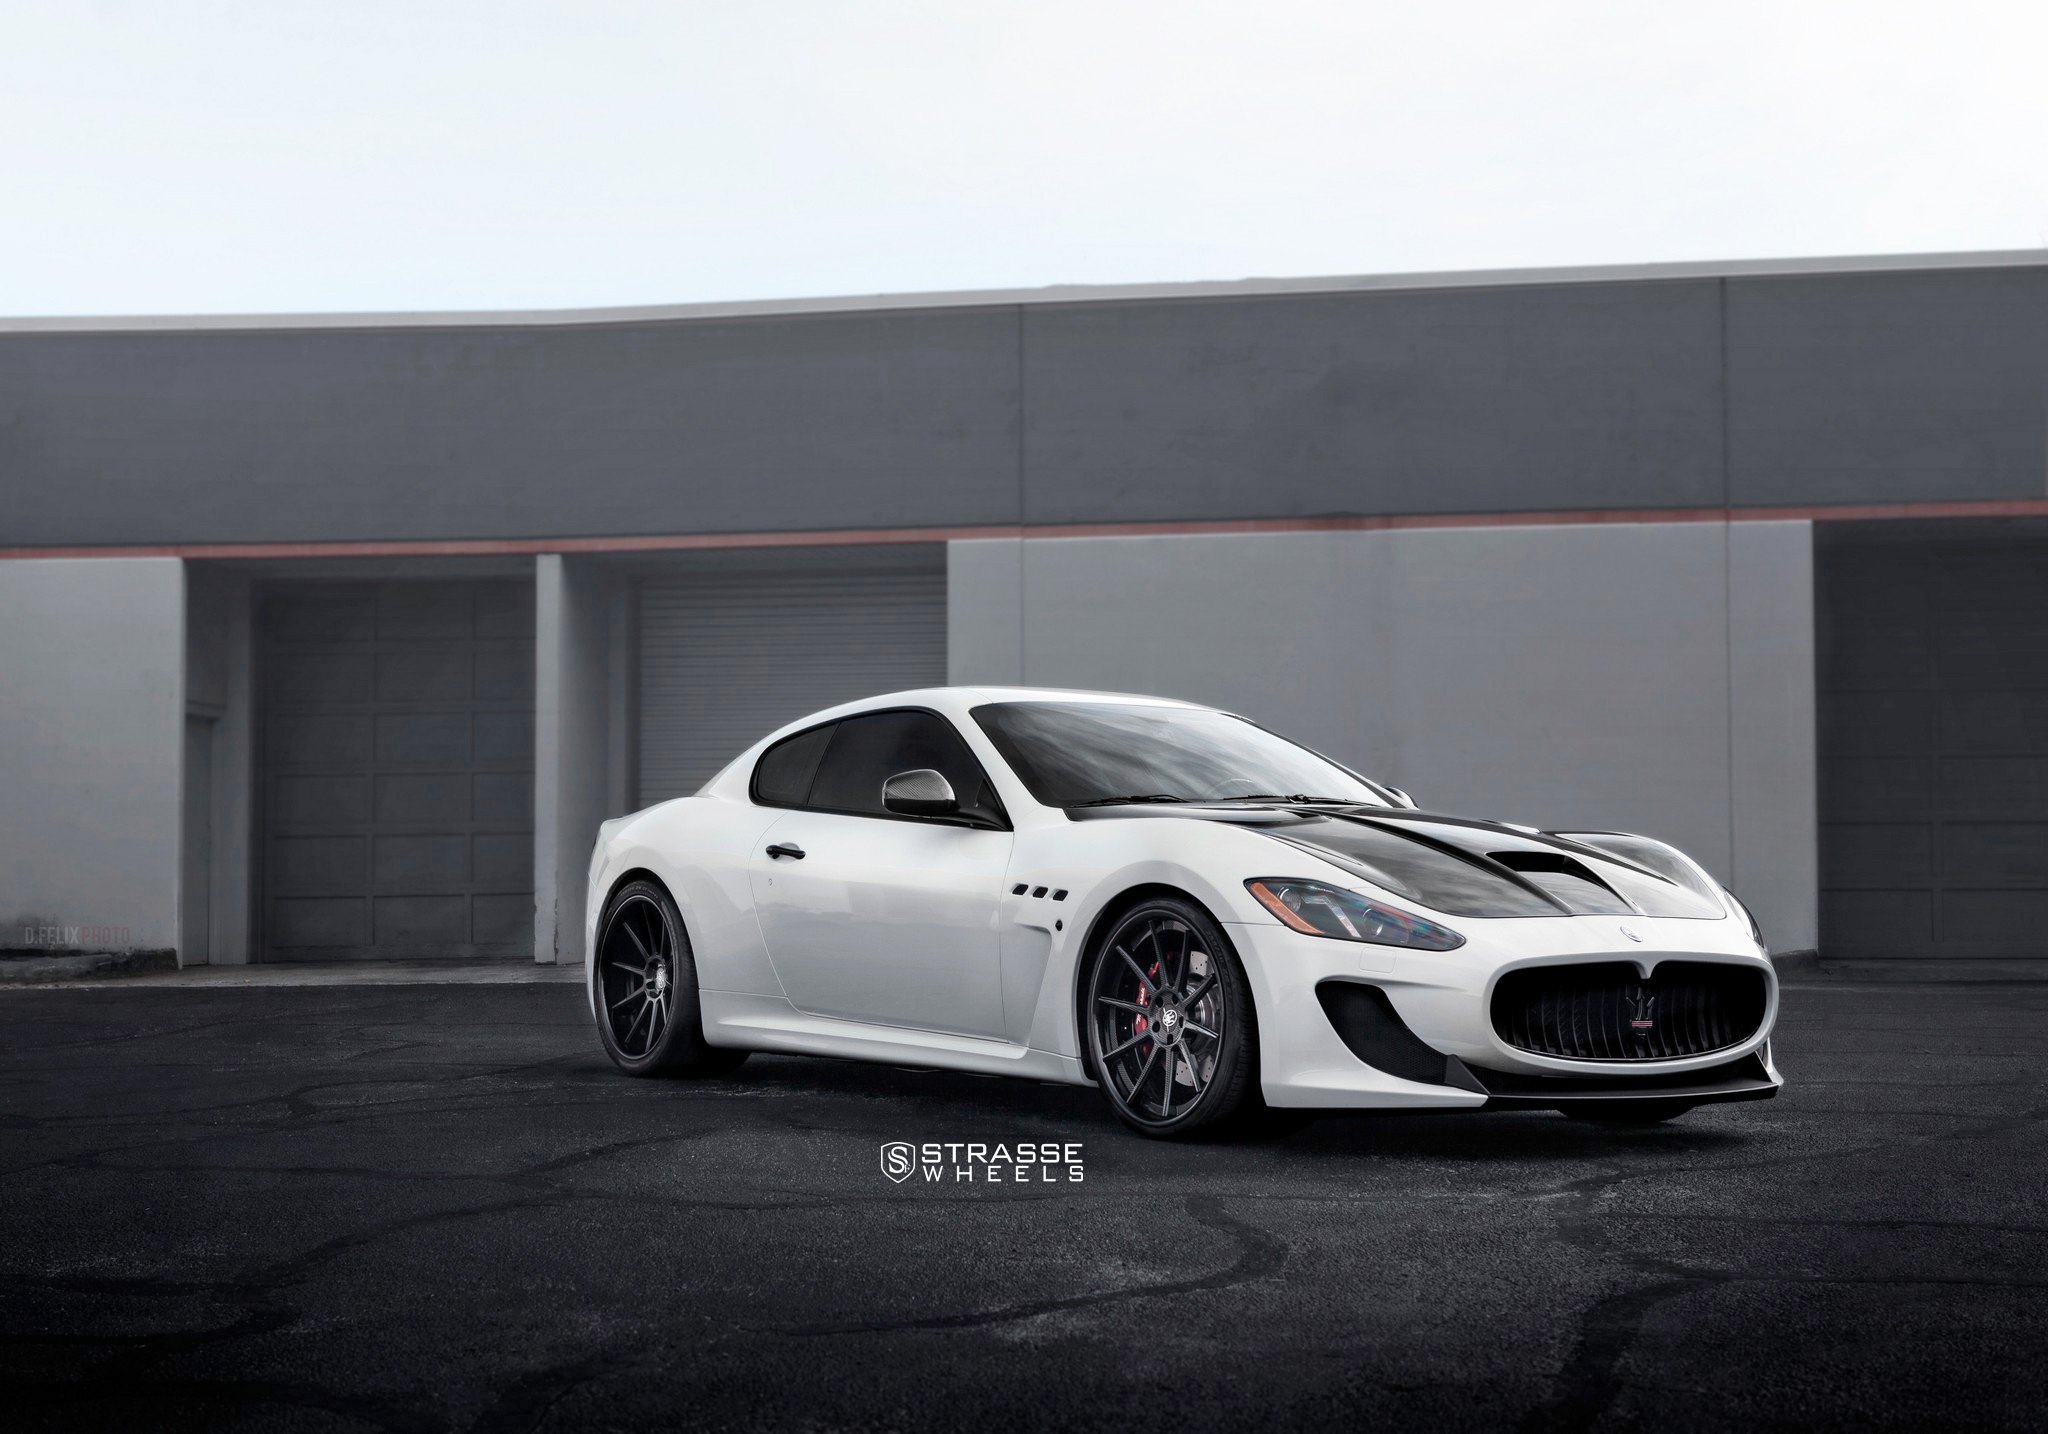 Aftermarket Side Skirts on White Maserati Granturismo - Photo by Strasse Forged